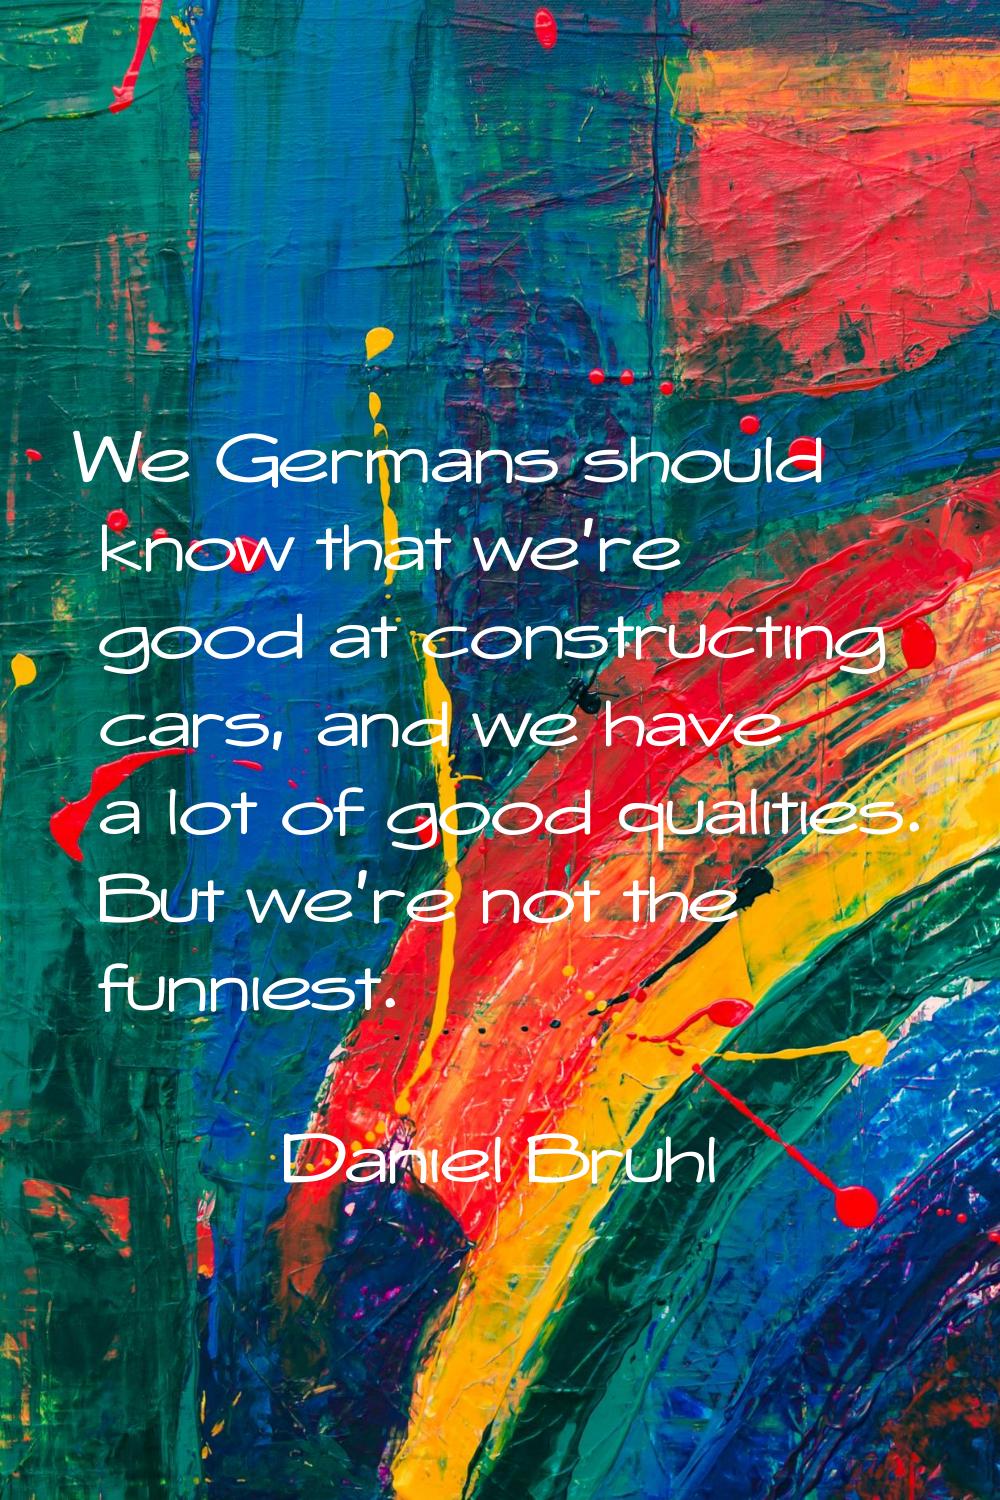 We Germans should know that we're good at constructing cars, and we have a lot of good qualities. B